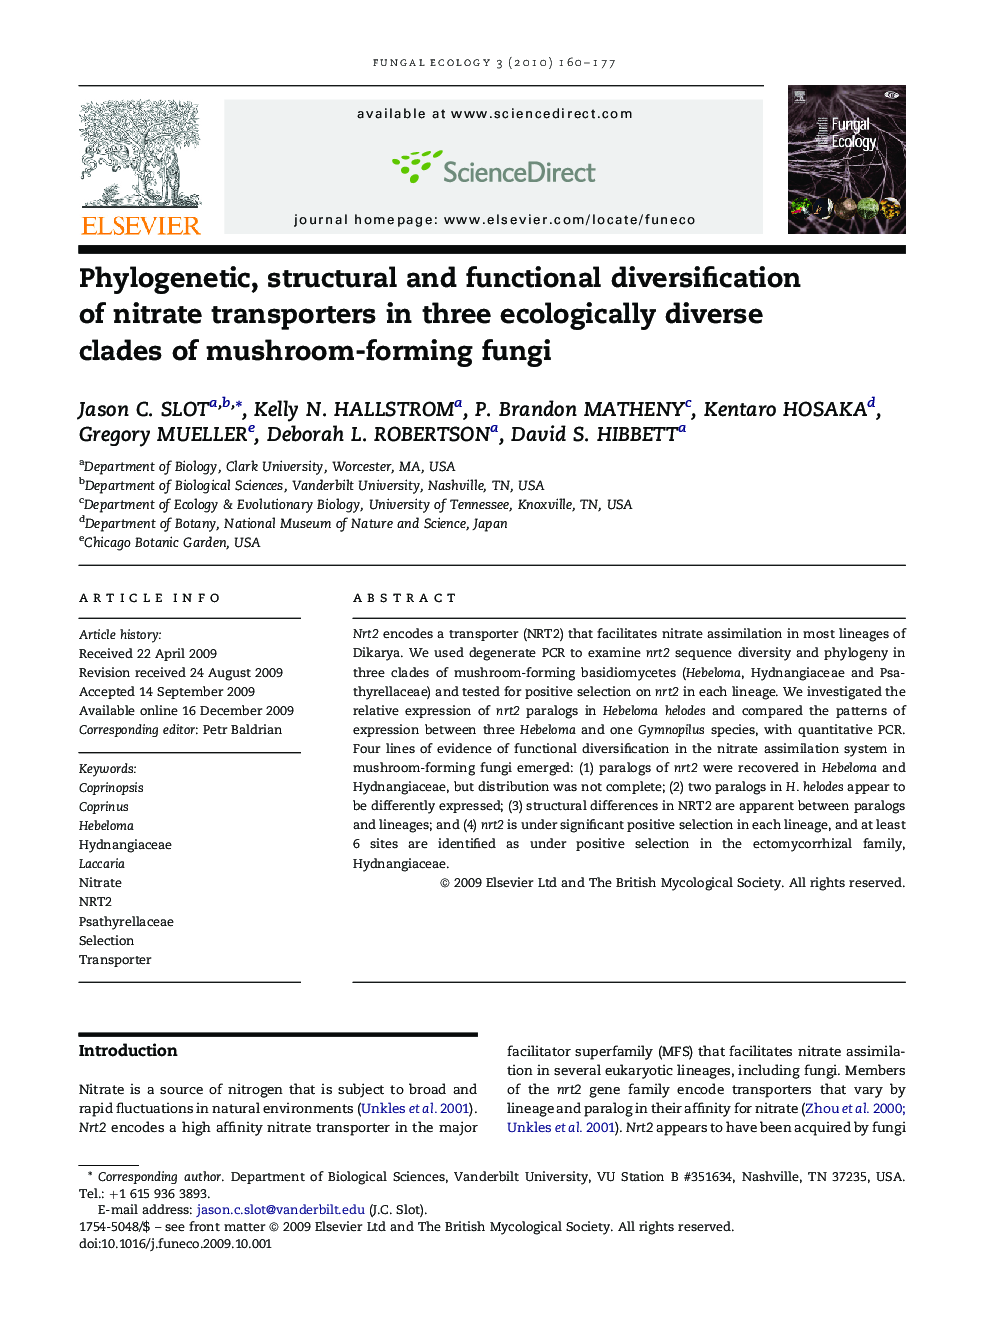 Phylogenetic, structural and functional diversification of nitrate transporters in three ecologically diverse clades of mushroom-forming fungi